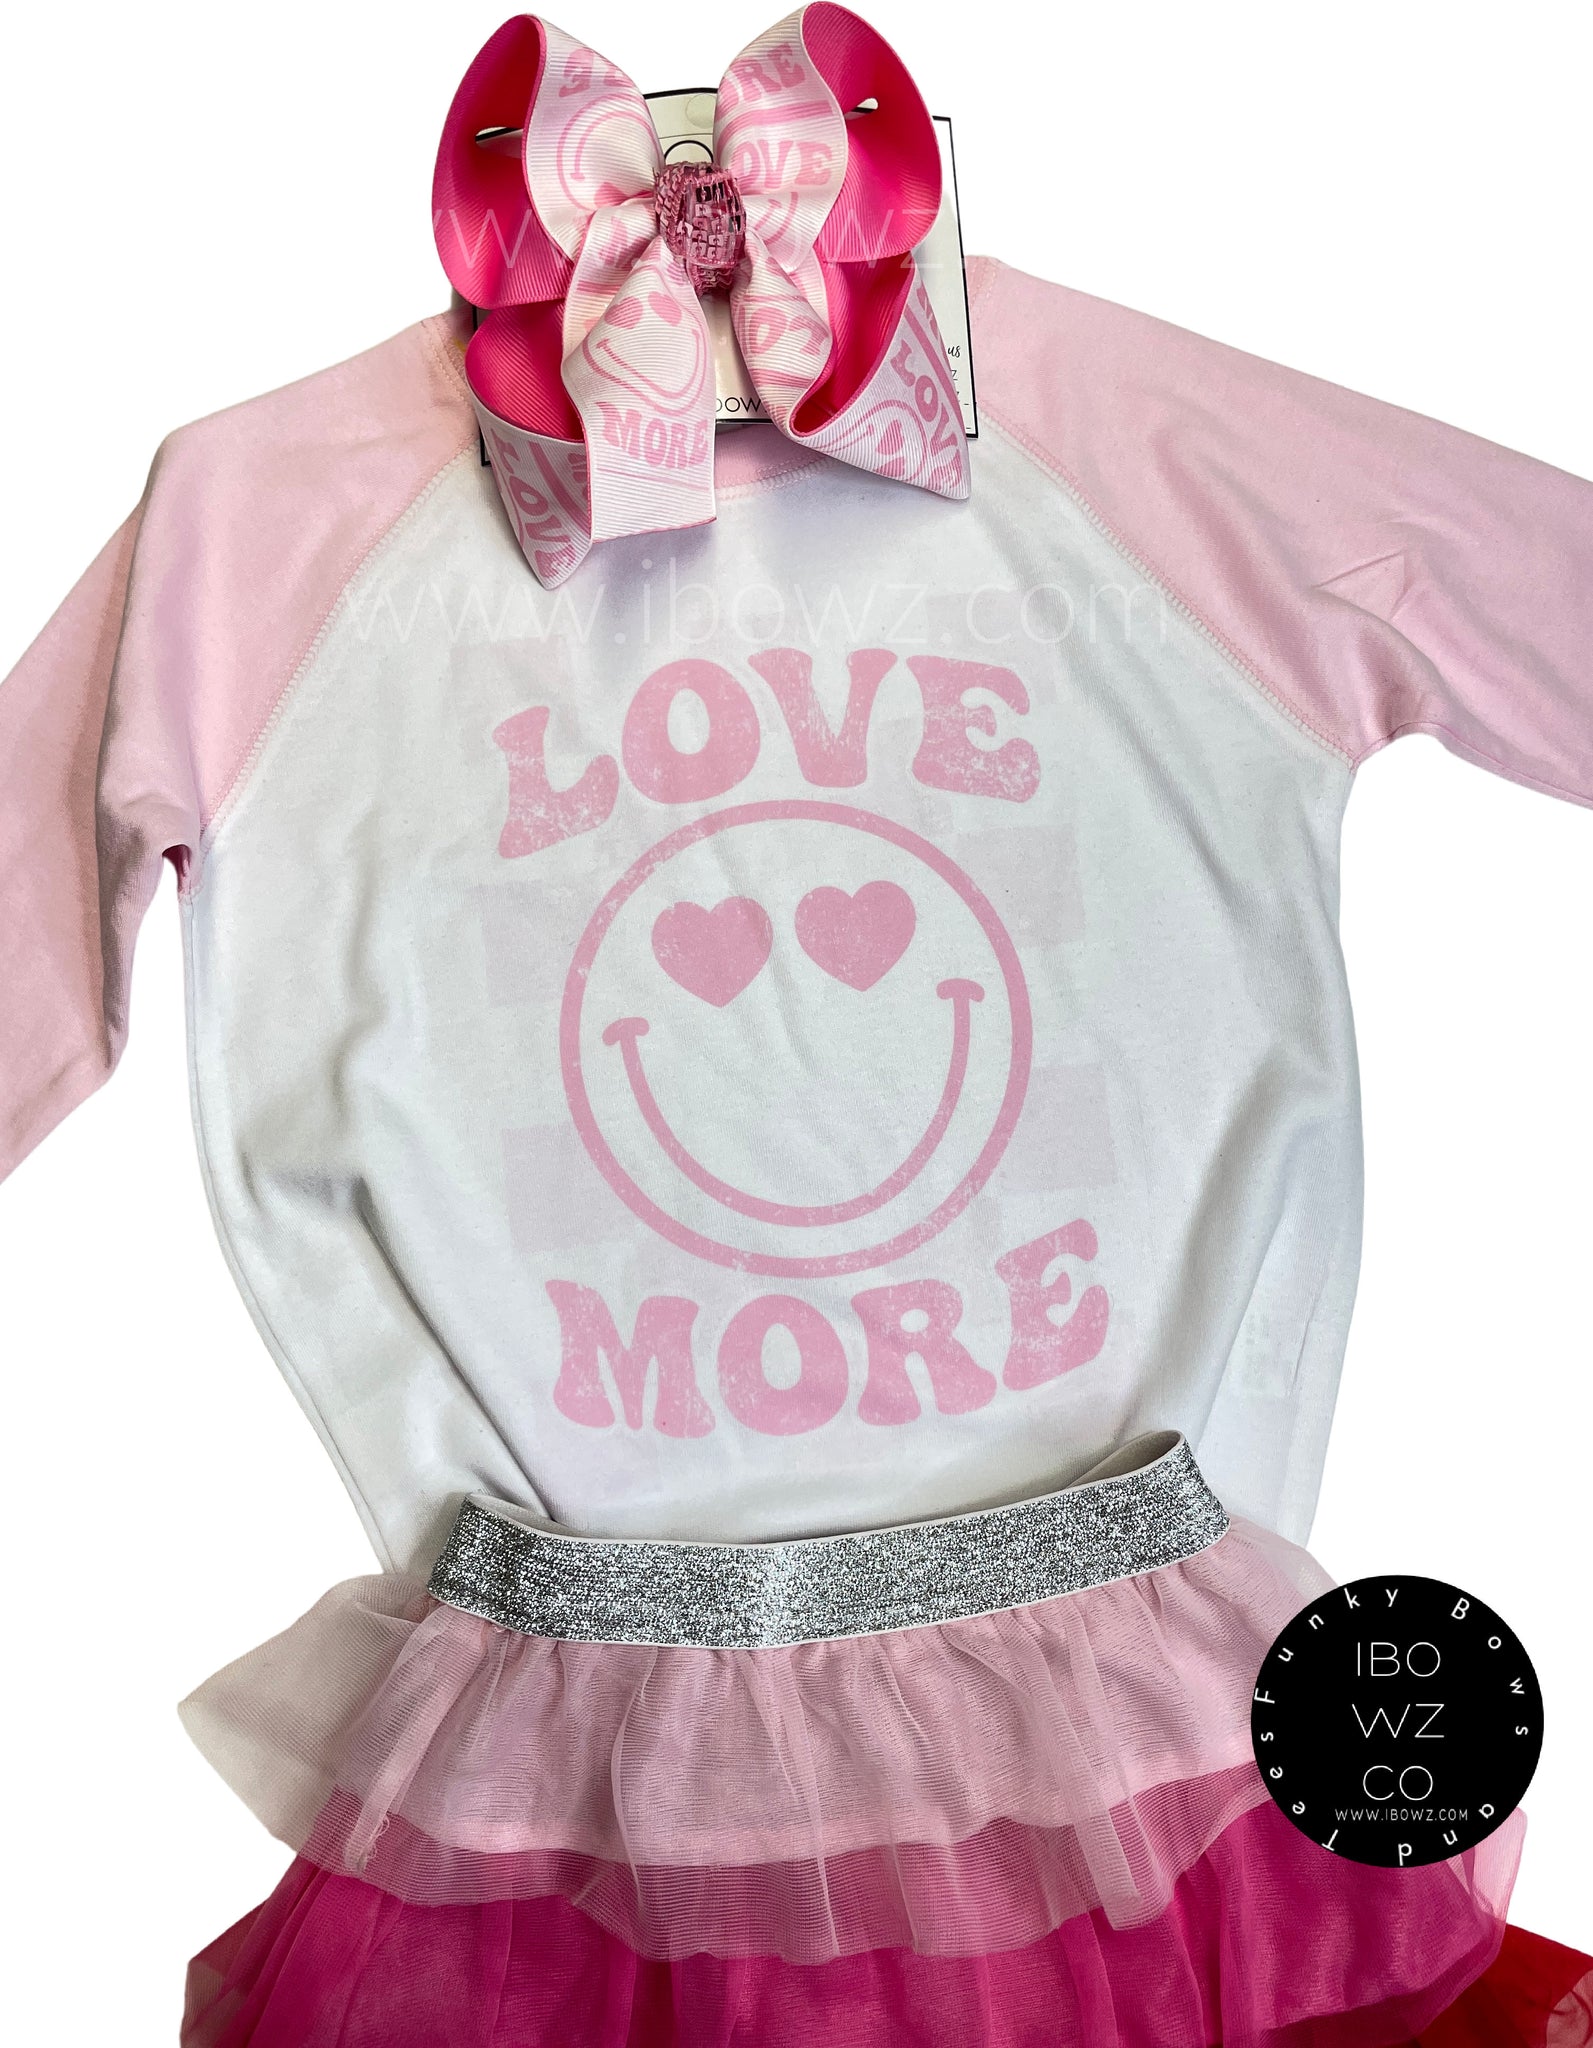 Valentines Day ~ Trendy Love More Smiley Face Matching Hairbow and T-shirt ~  Exclusive iBOWZ design